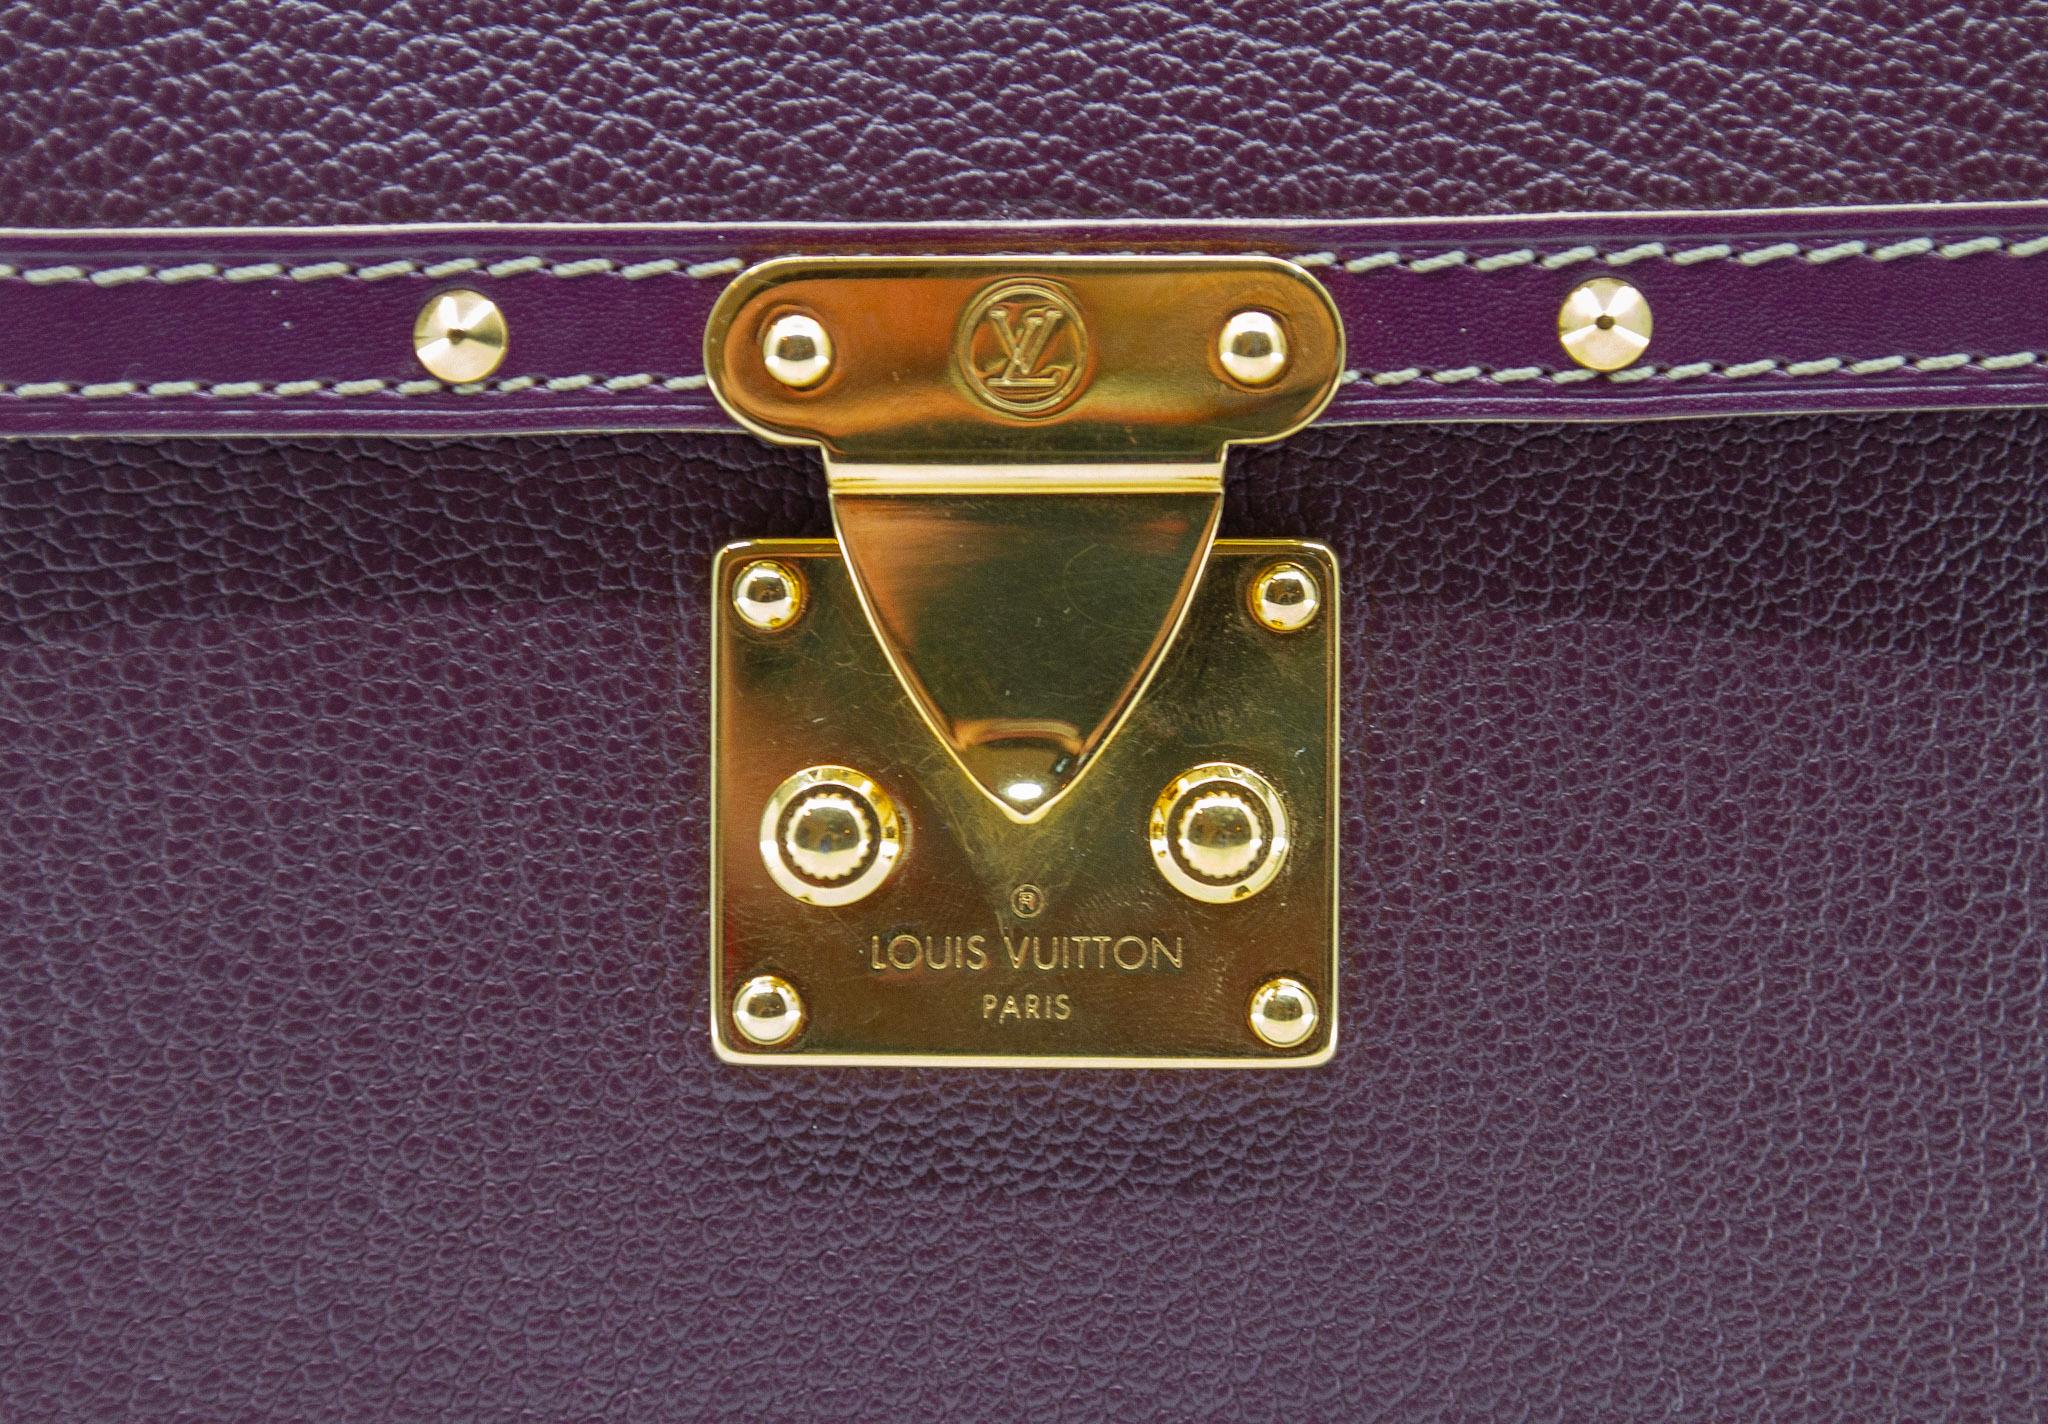 Louis Vuitton Top Handle Bag, 2004 Collection. Maroon. Gold-tone Hardware, Flat Handle, Canvas Lining. Push lock closure at front, protective feet at base. Includes Dust Bag.

Height: 5.75